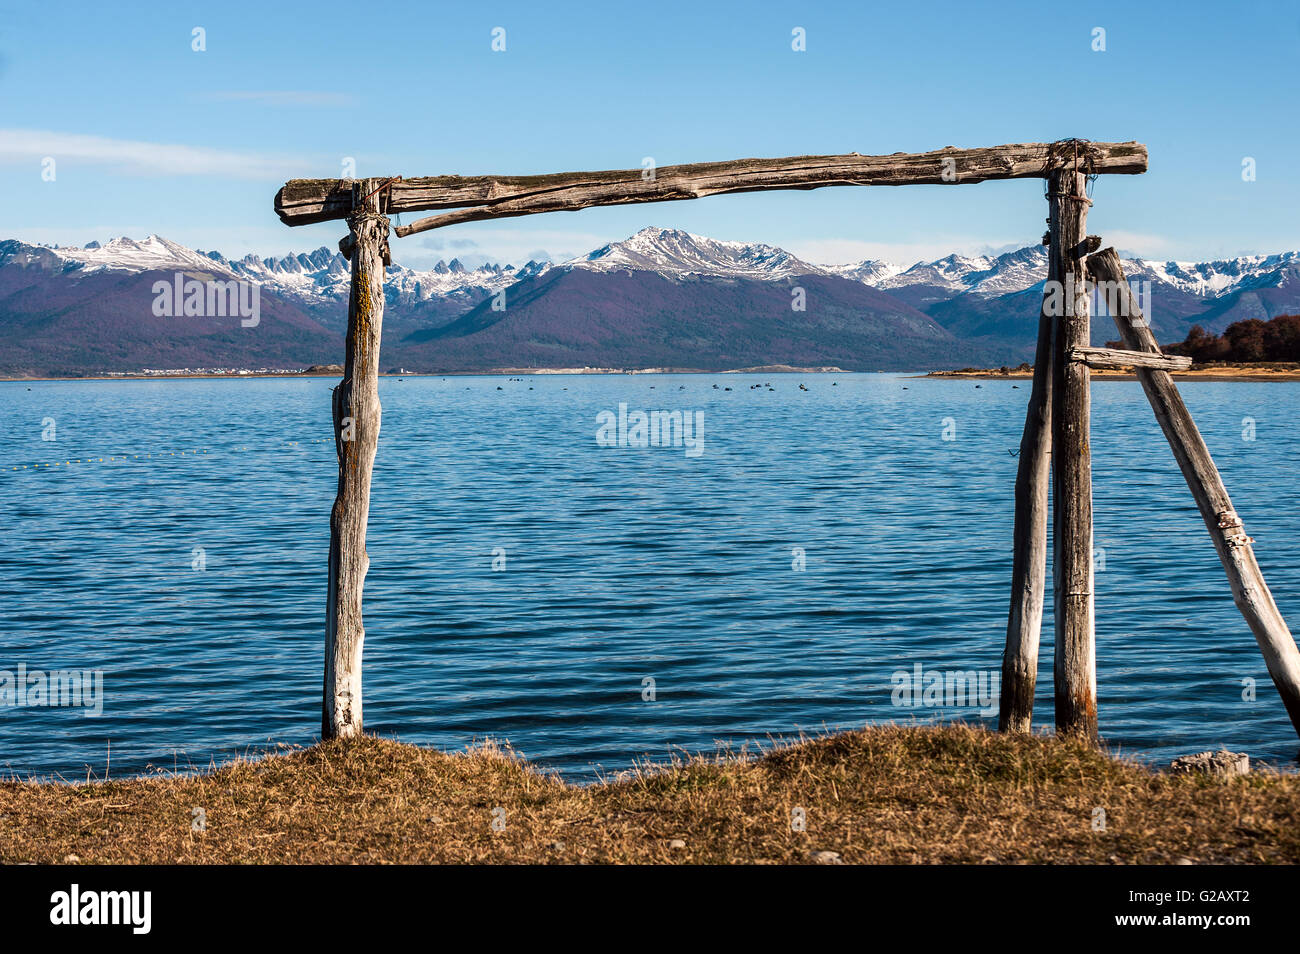 Autumn in Patagonia. Tierra del Fuego, Beagle Channel and Chilean territory, view from the Argentina side Stock Photo